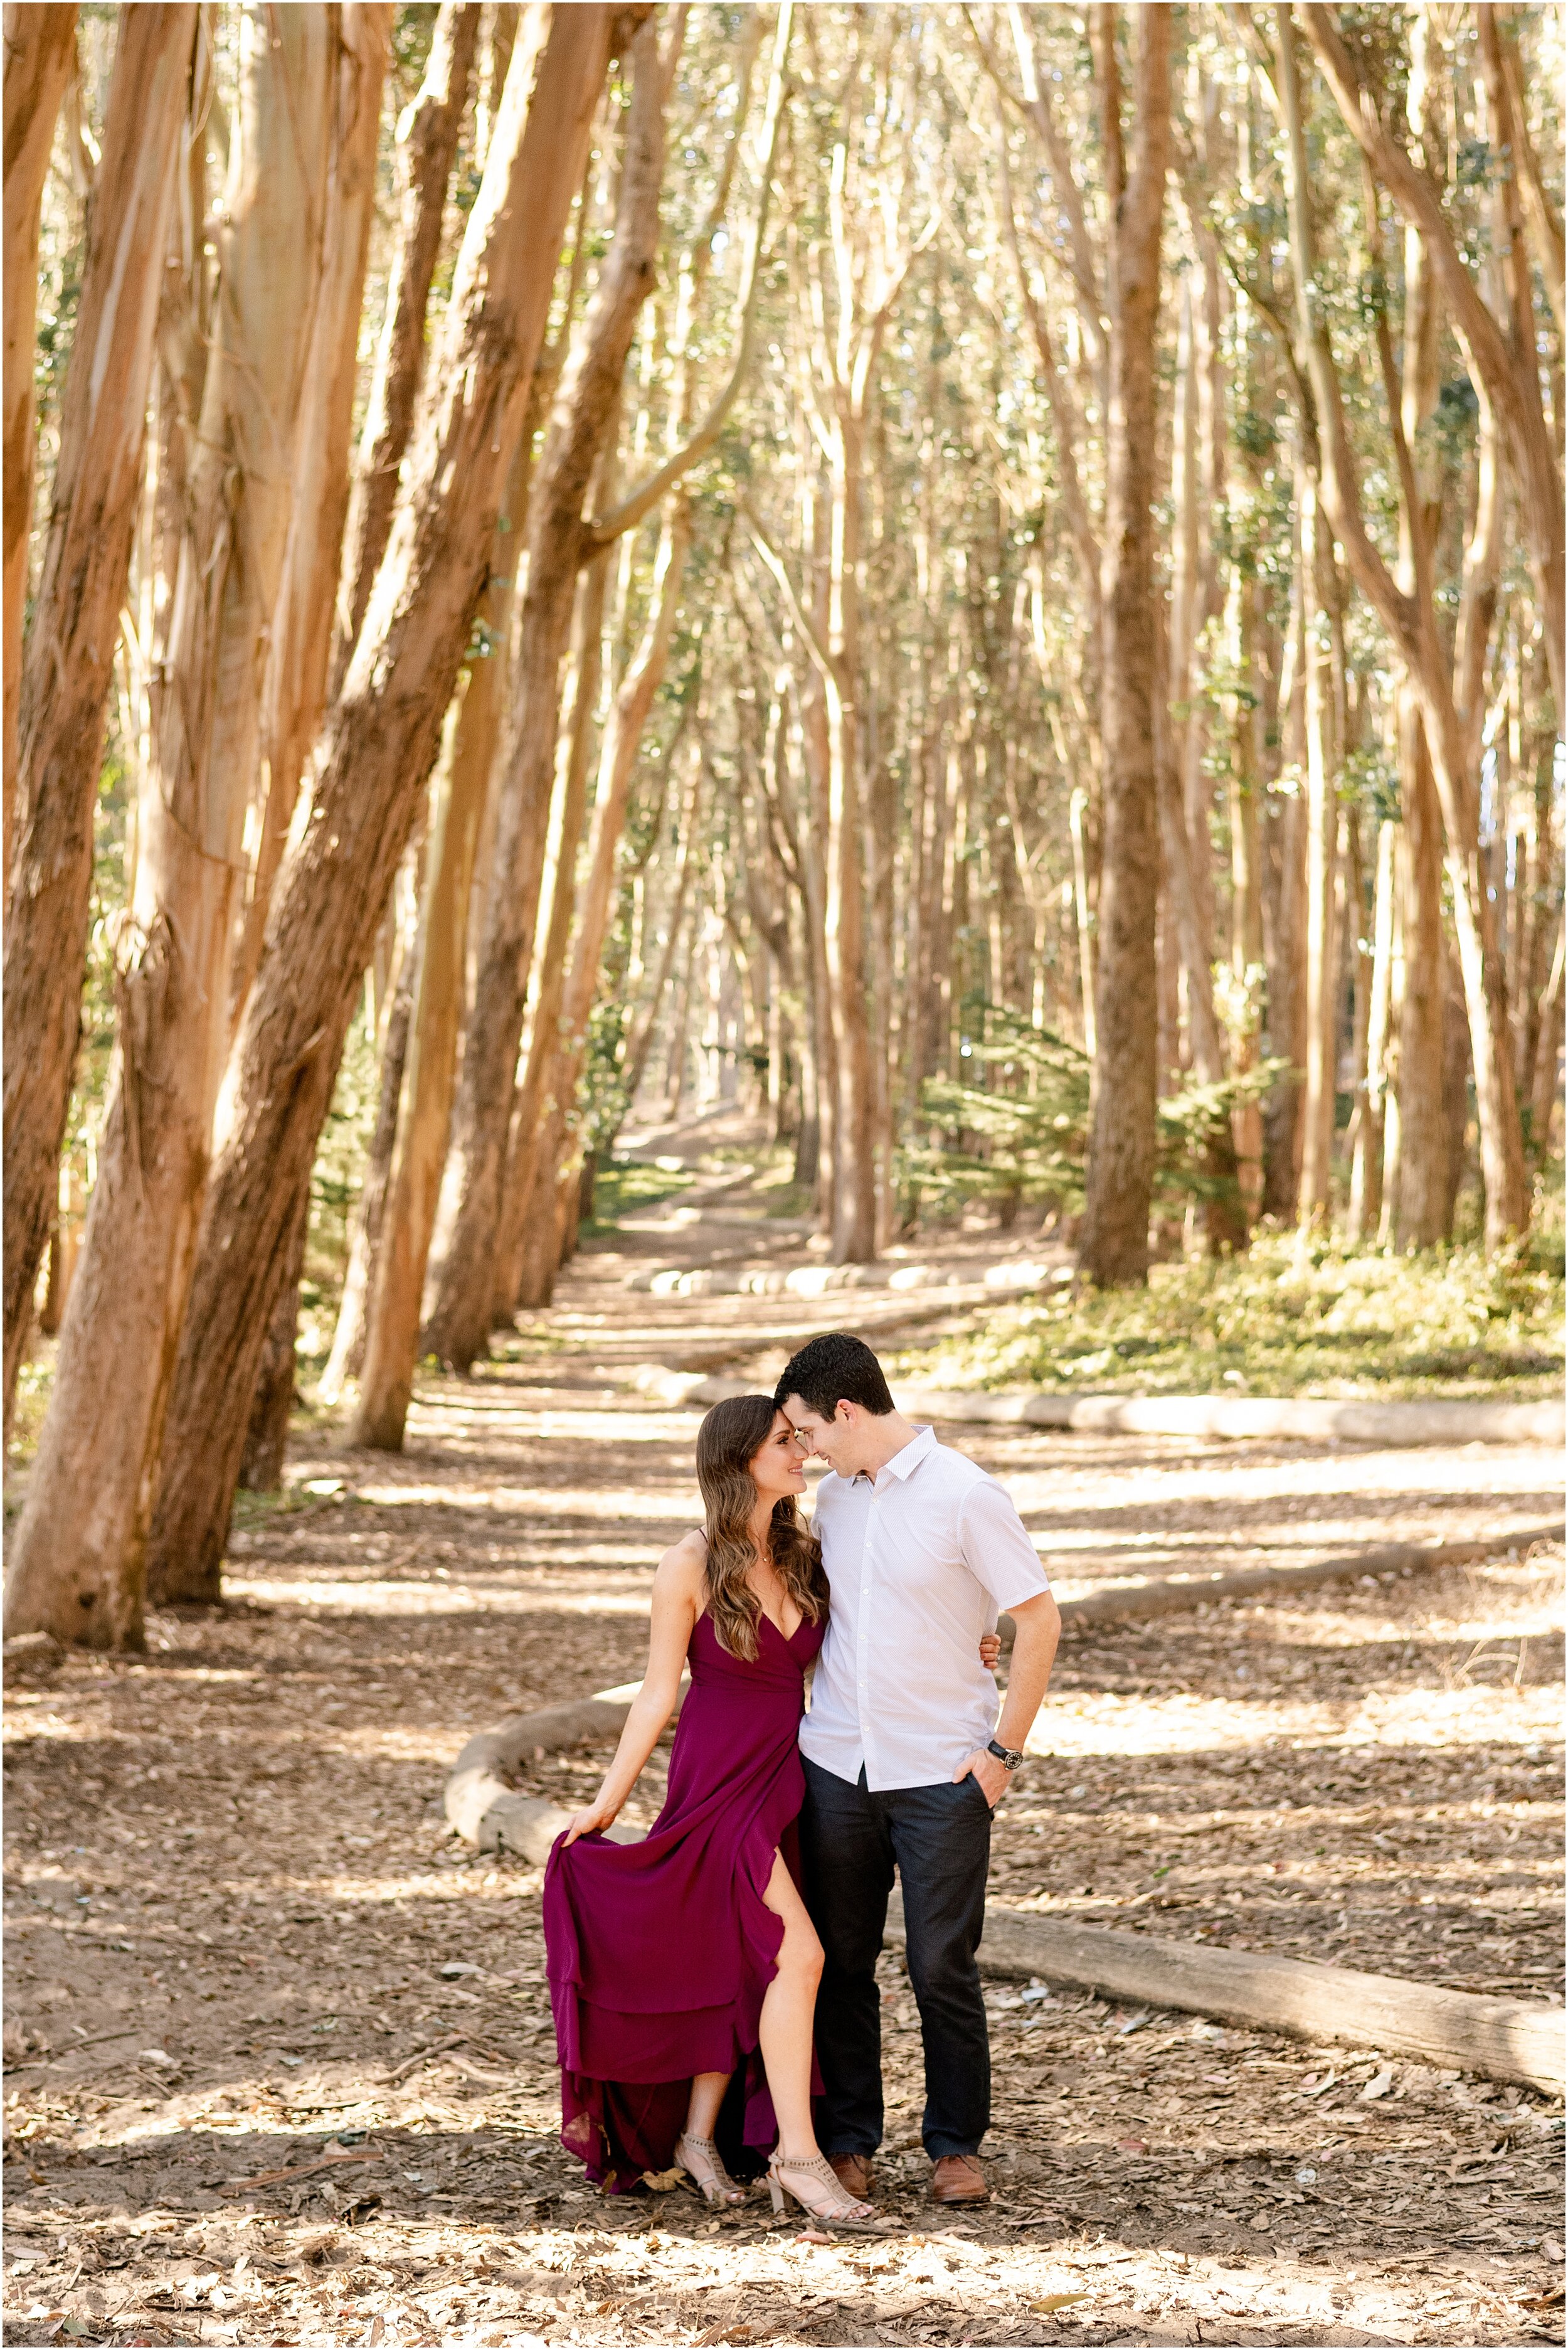 hannah leigh photography Baker Beach, Lovers Lane. Palace of Fine Arts Engagement Session San Franscico, CA_4828.jpg